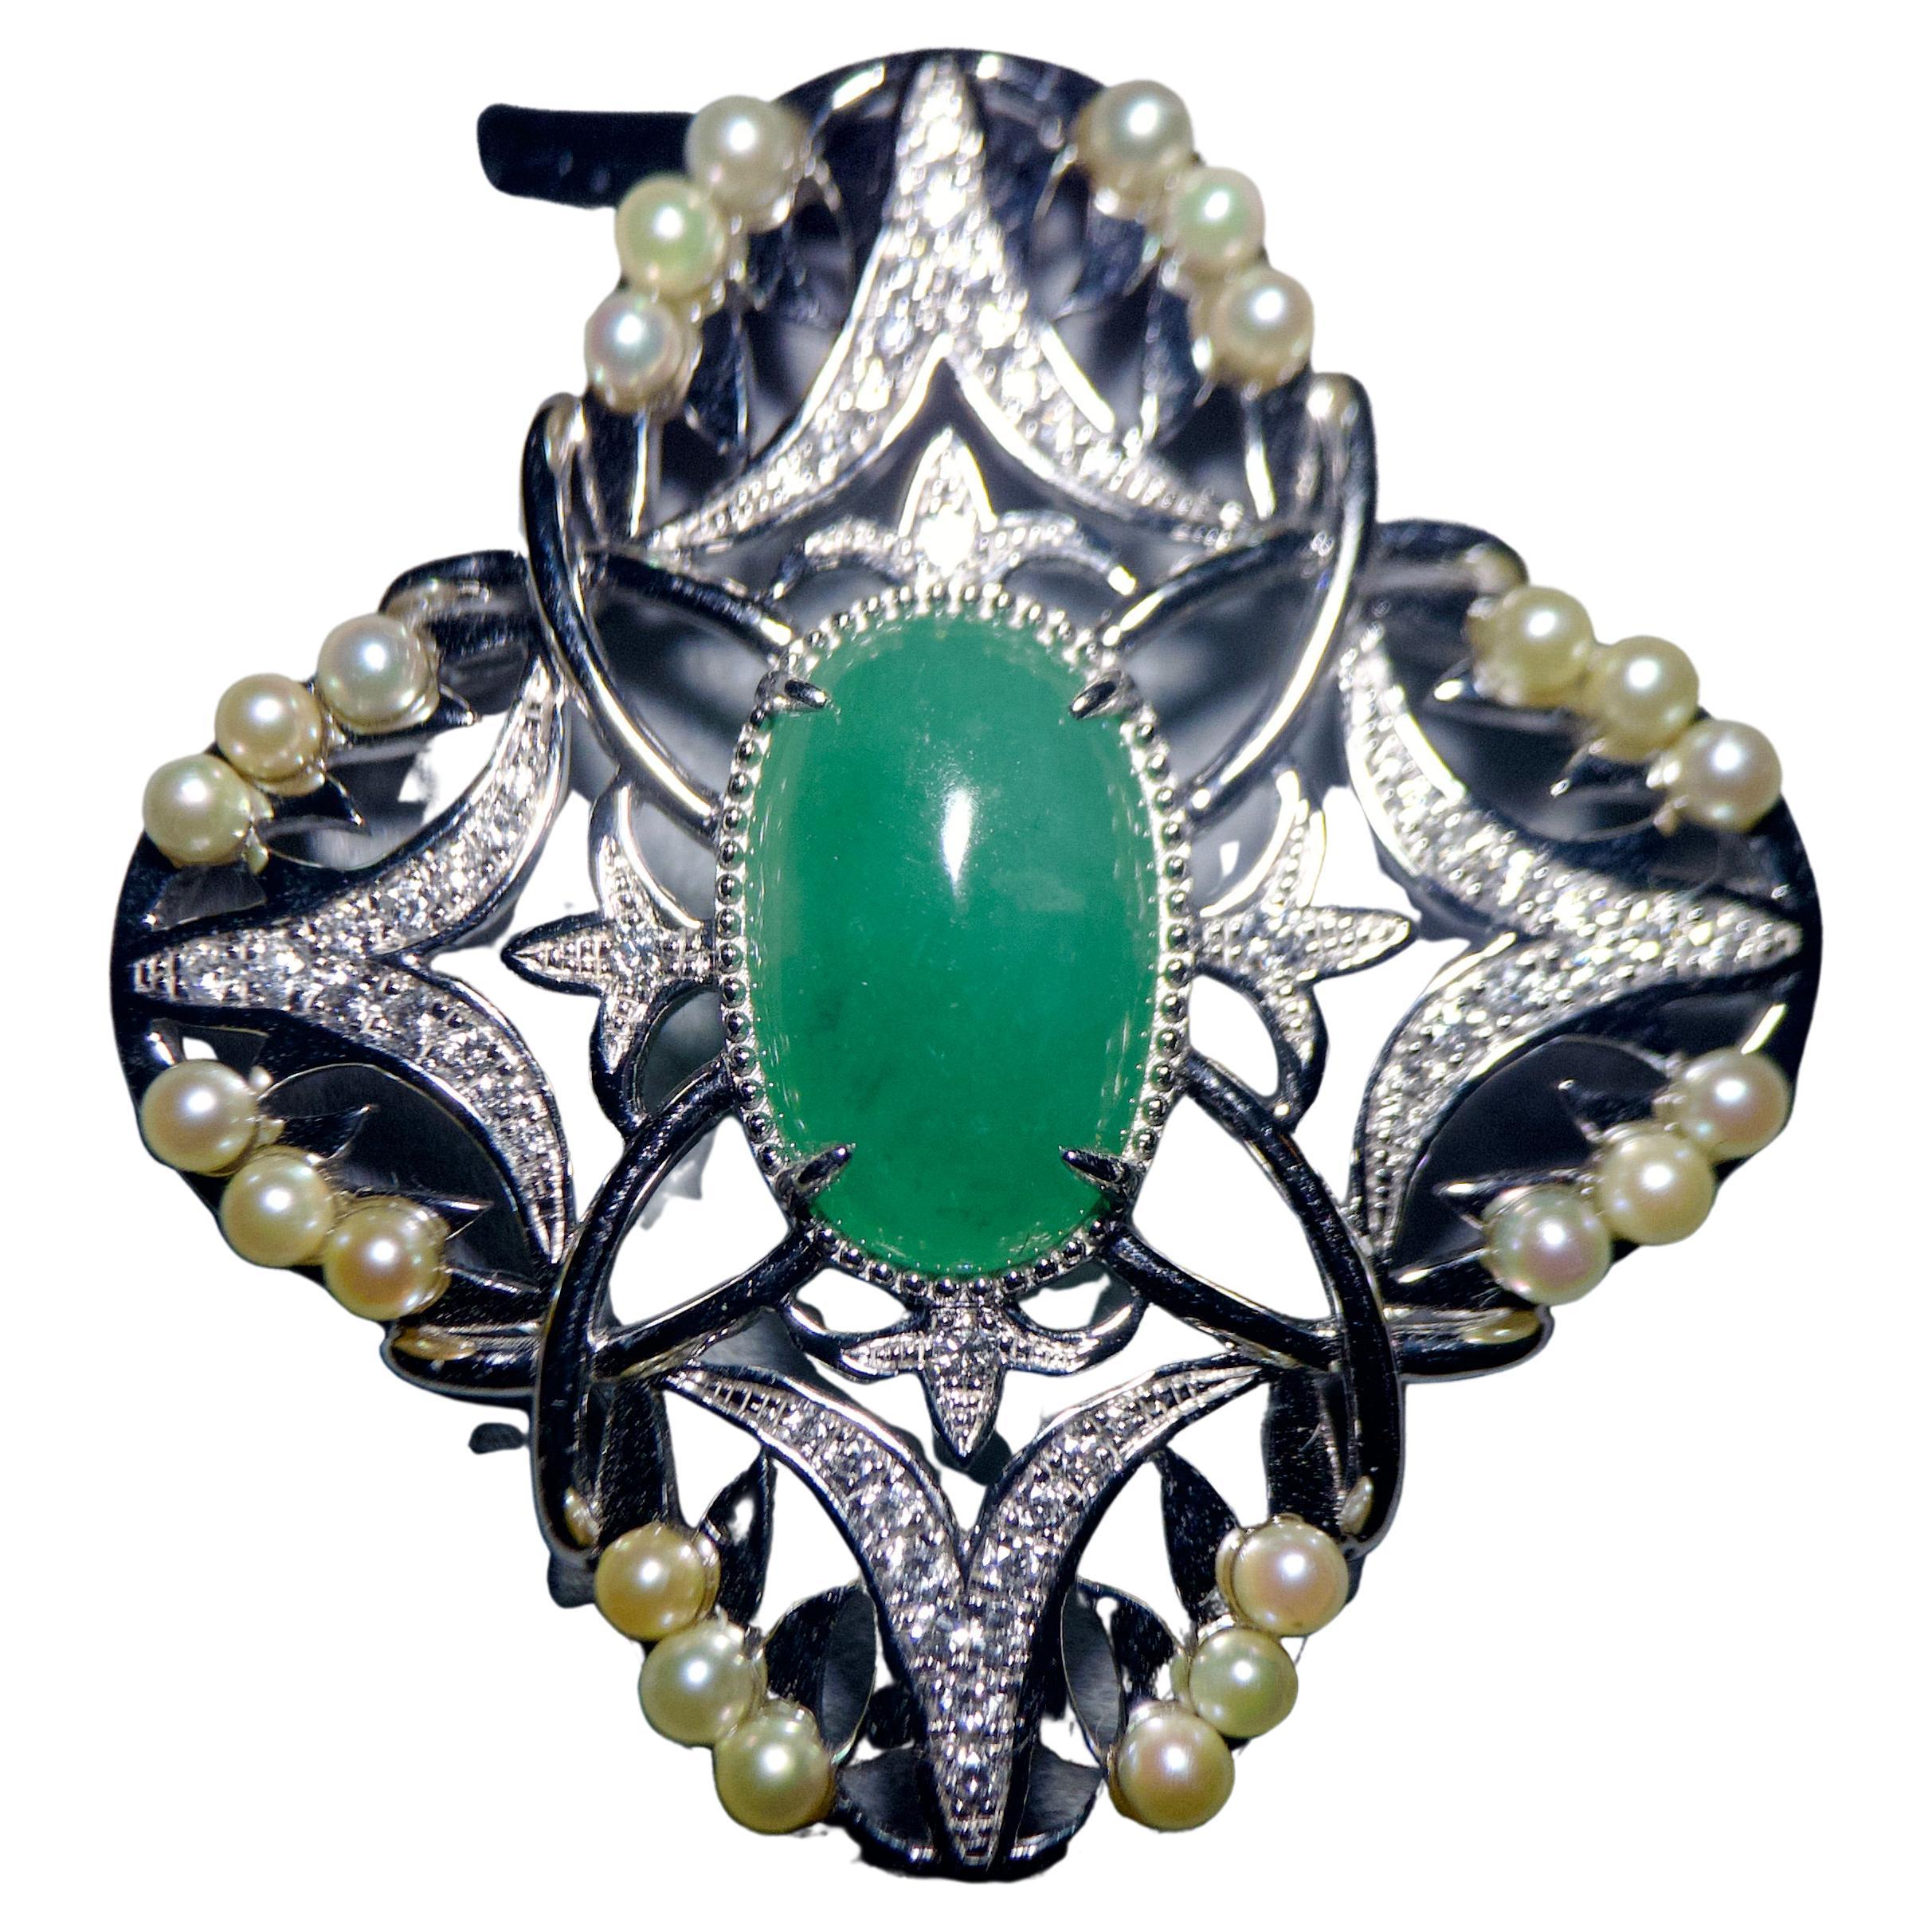 Eostre Type A Green Jadeite, Seed Pearl and Diamond Pendant in 18k White Gold